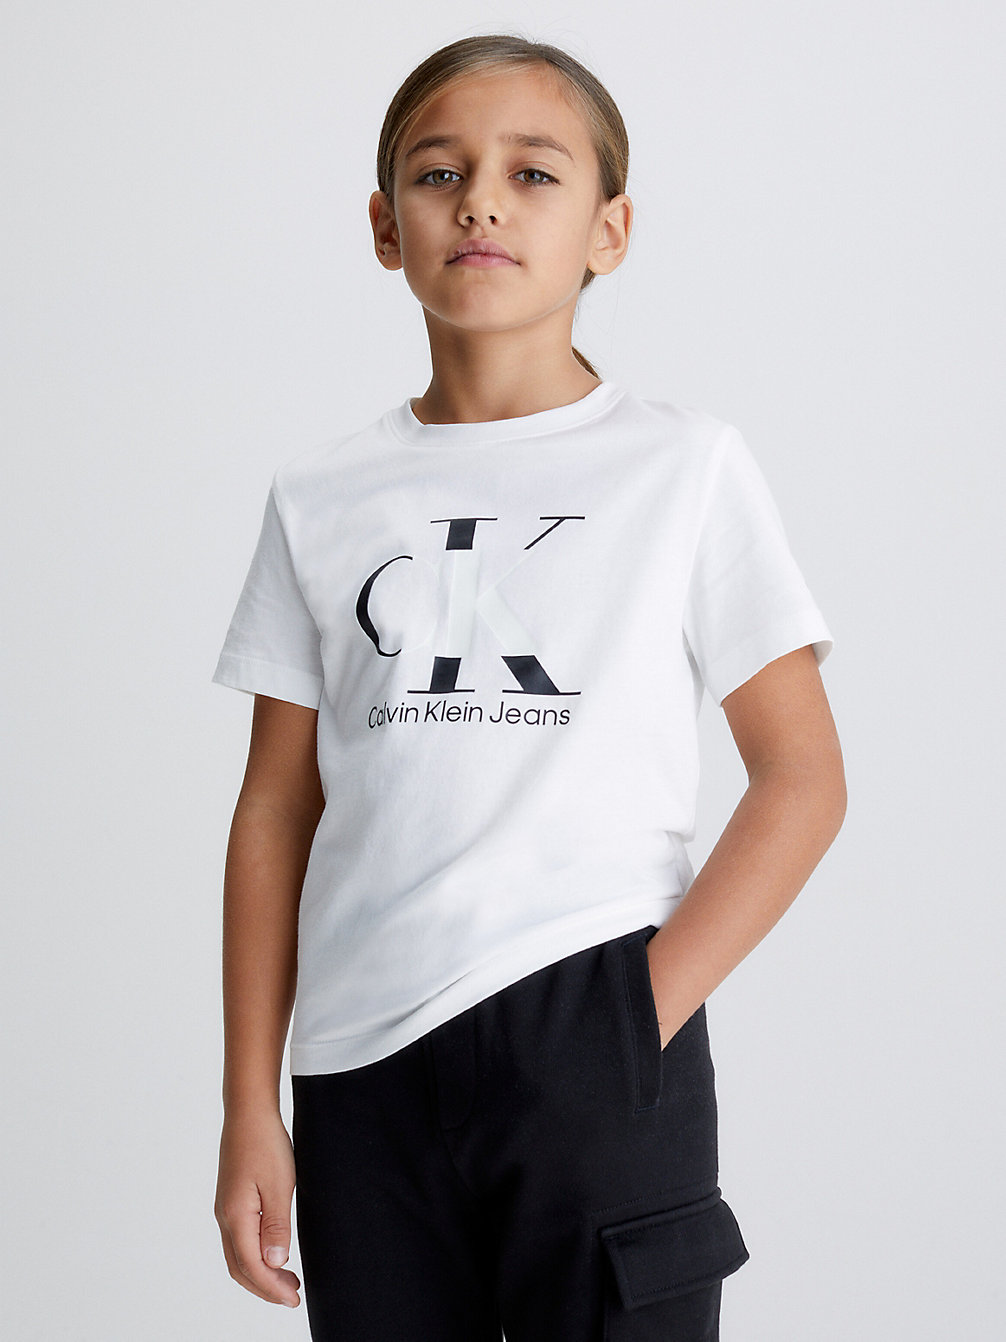 BRIGHT WHITE > T-Shirt Mit Color Reveal-Logo > undefined boys - Calvin Klein